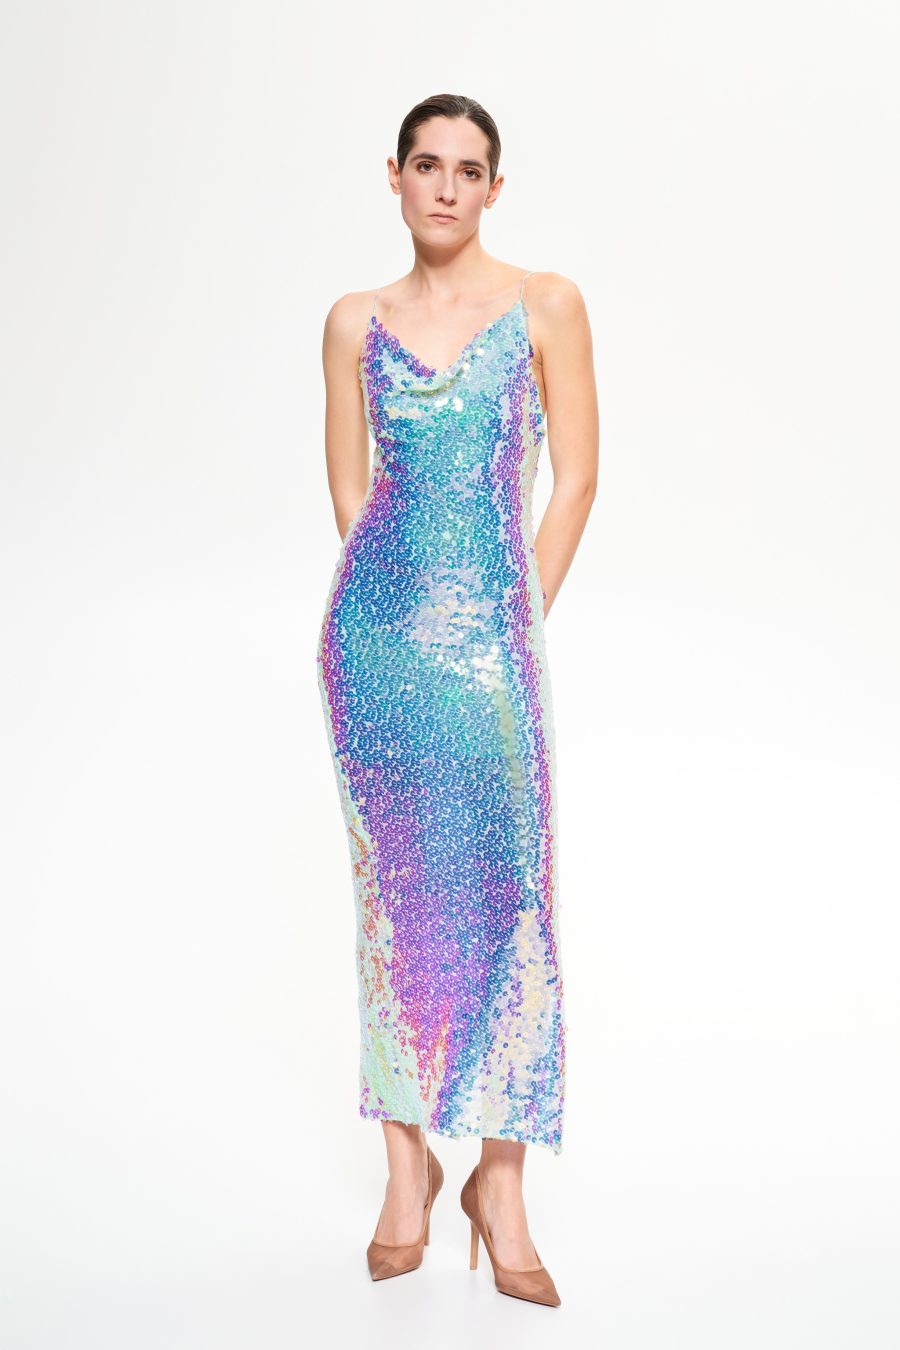 dress-with-sequins (3)